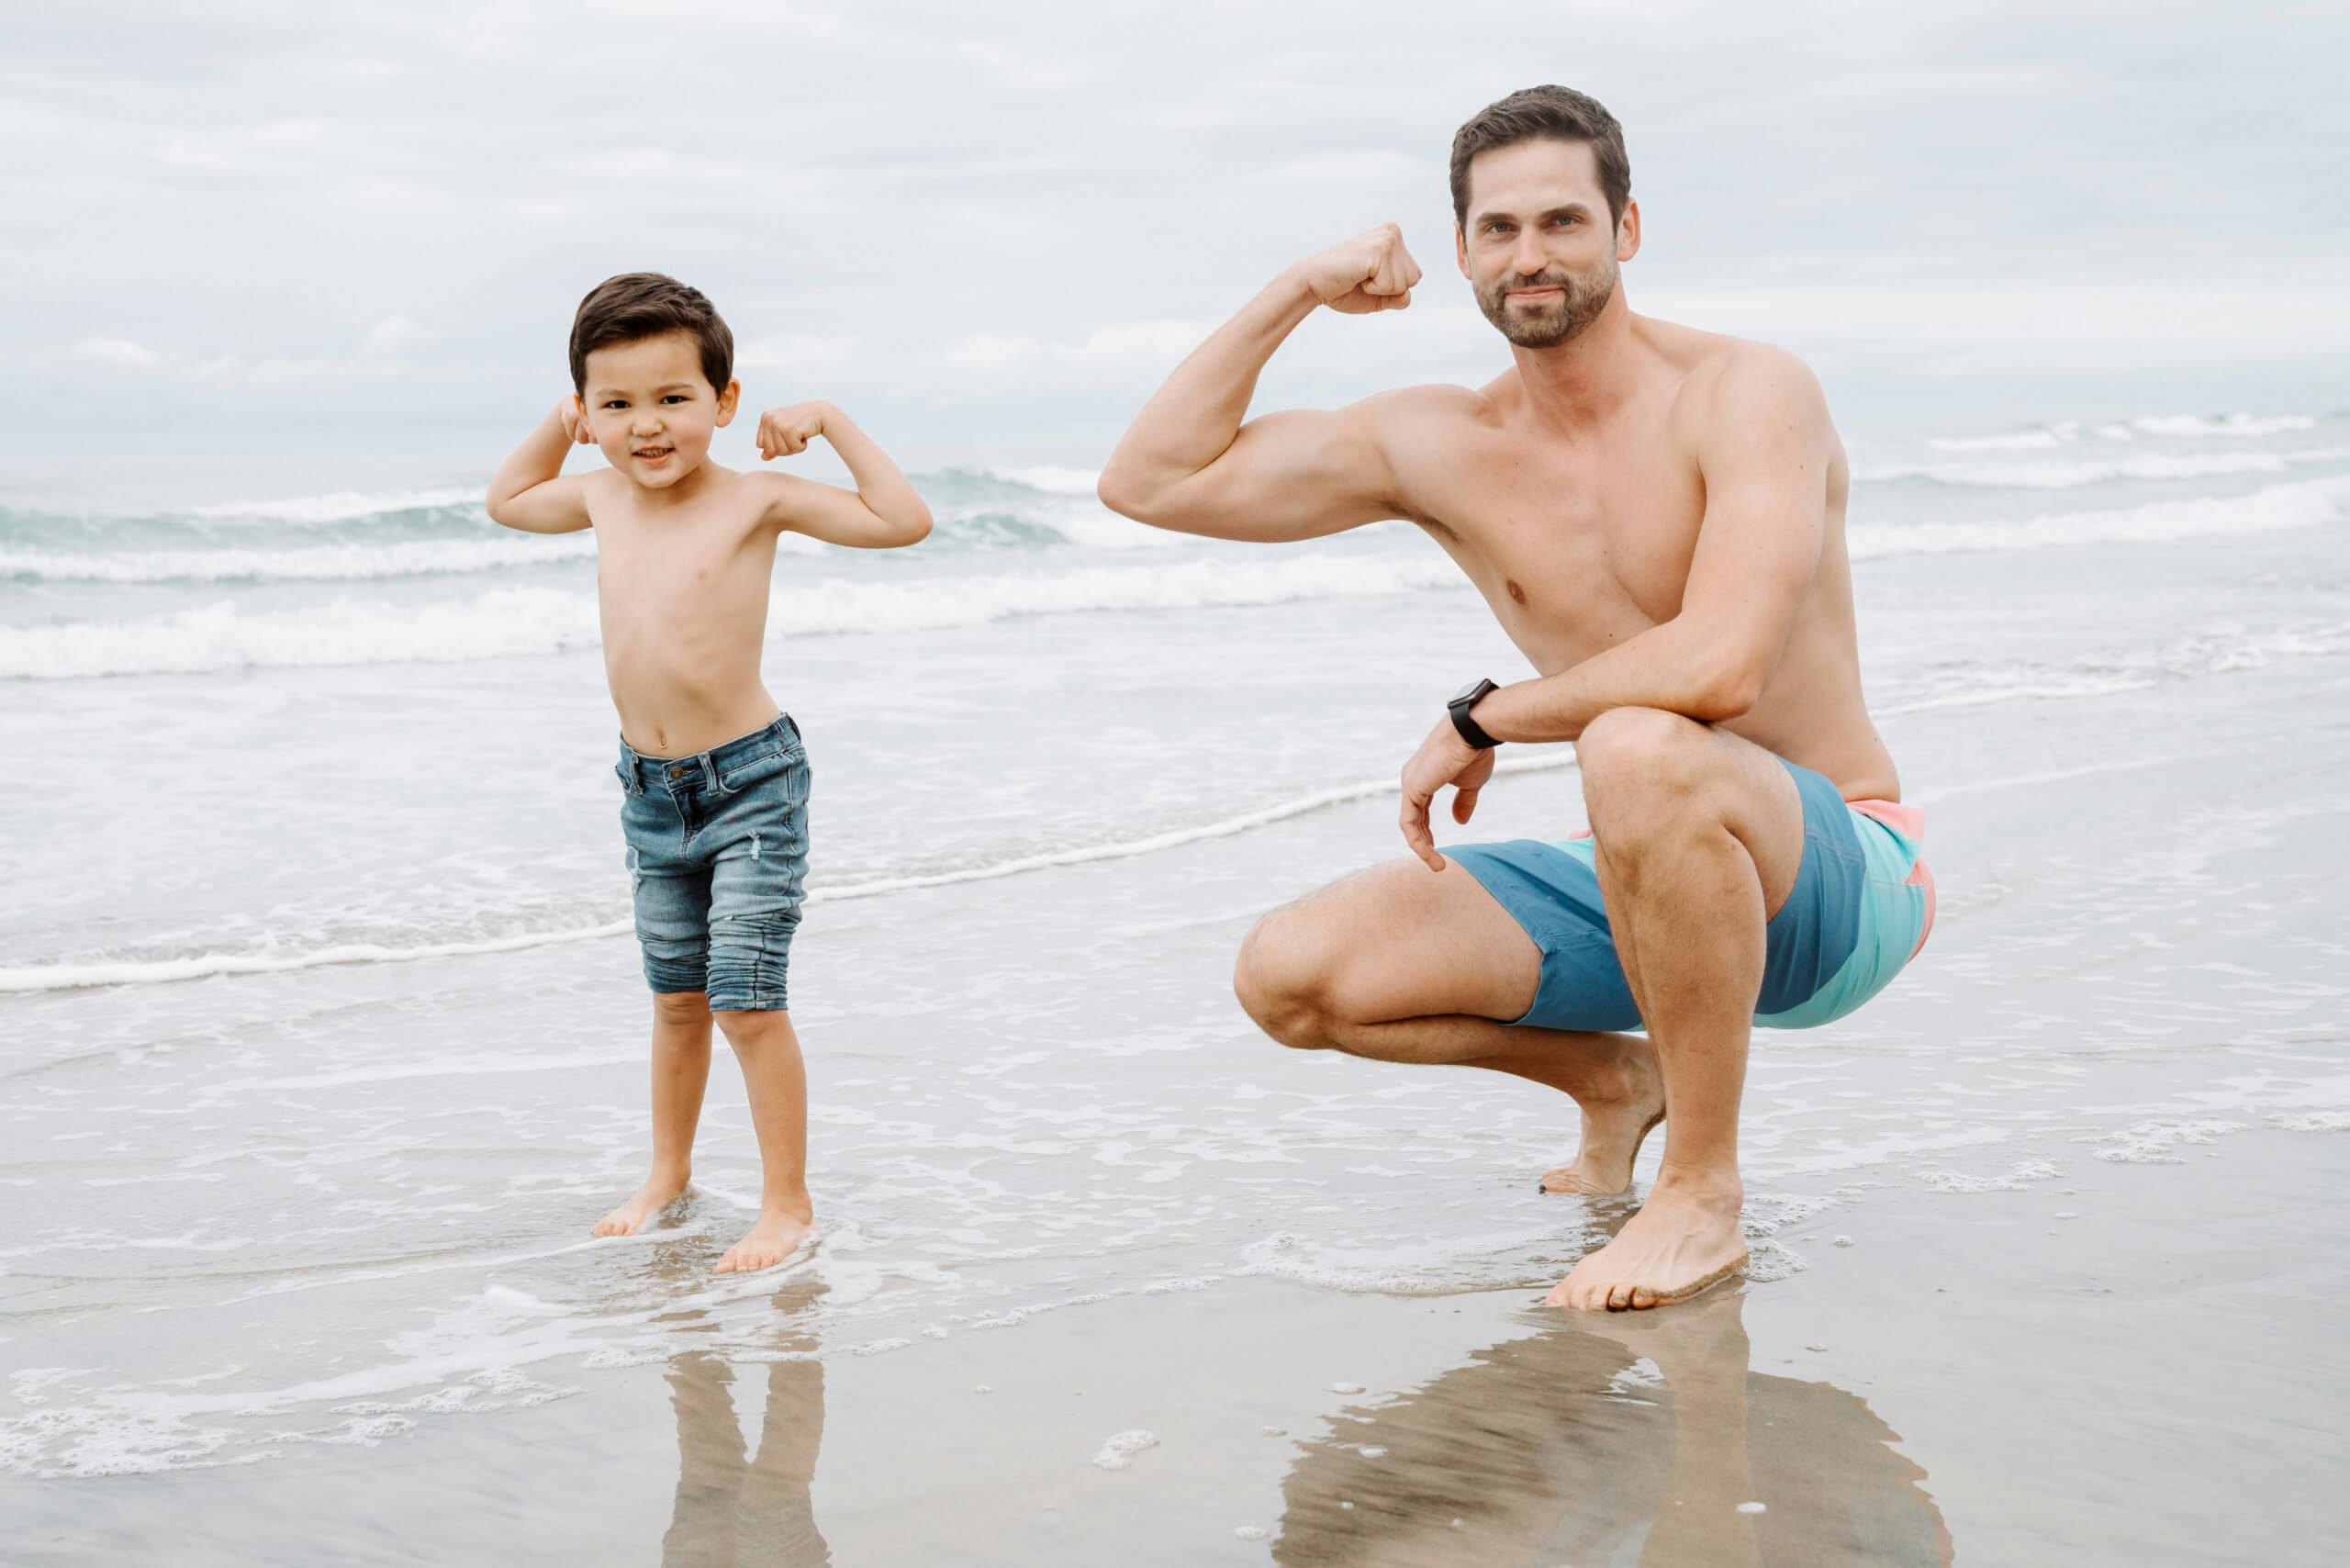 A young boy and a man flexing their muscles on the beach